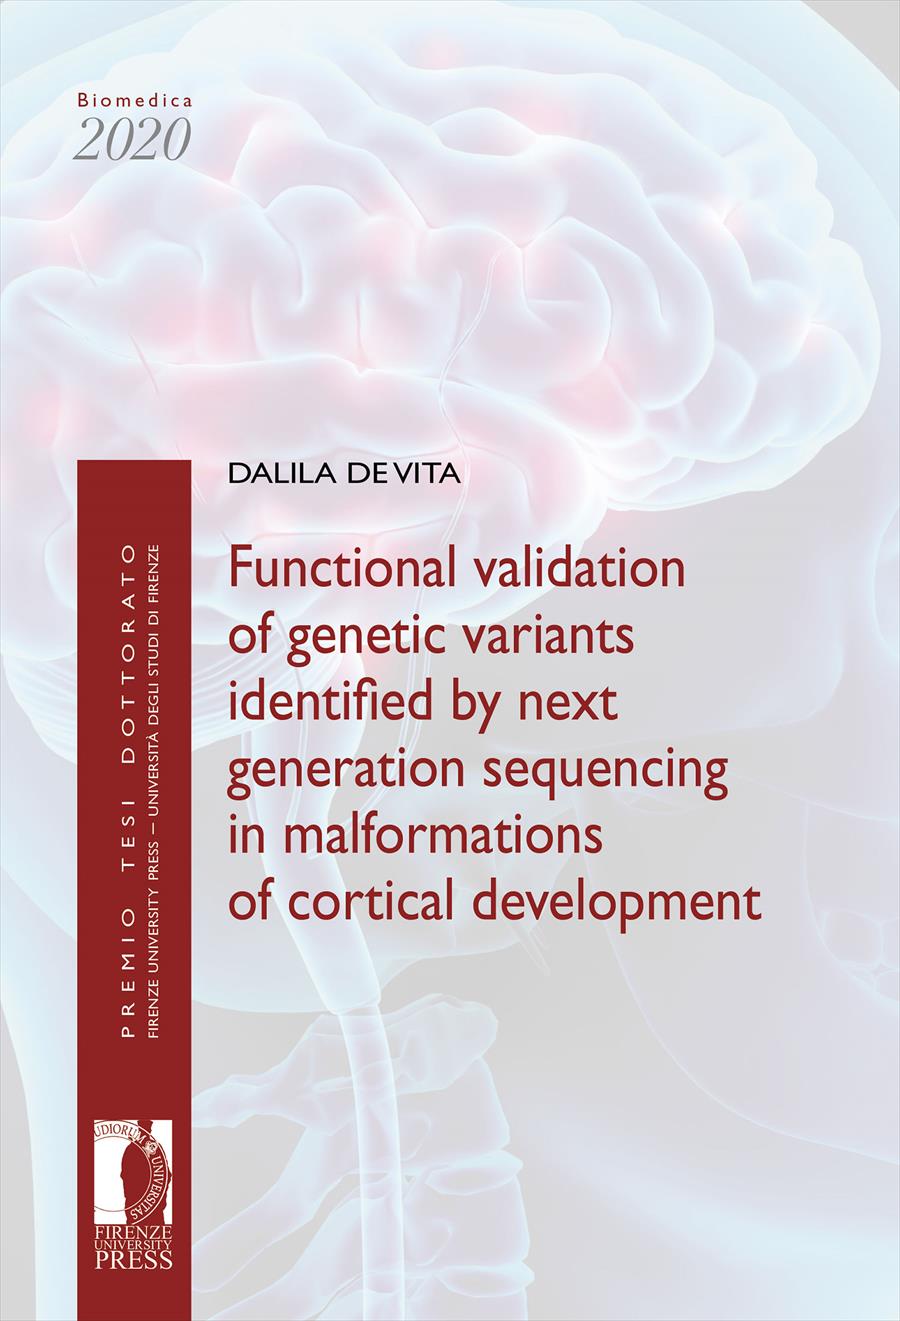 Functional validation of genetic variants identified by next generation sequencing in malformations of cortical development